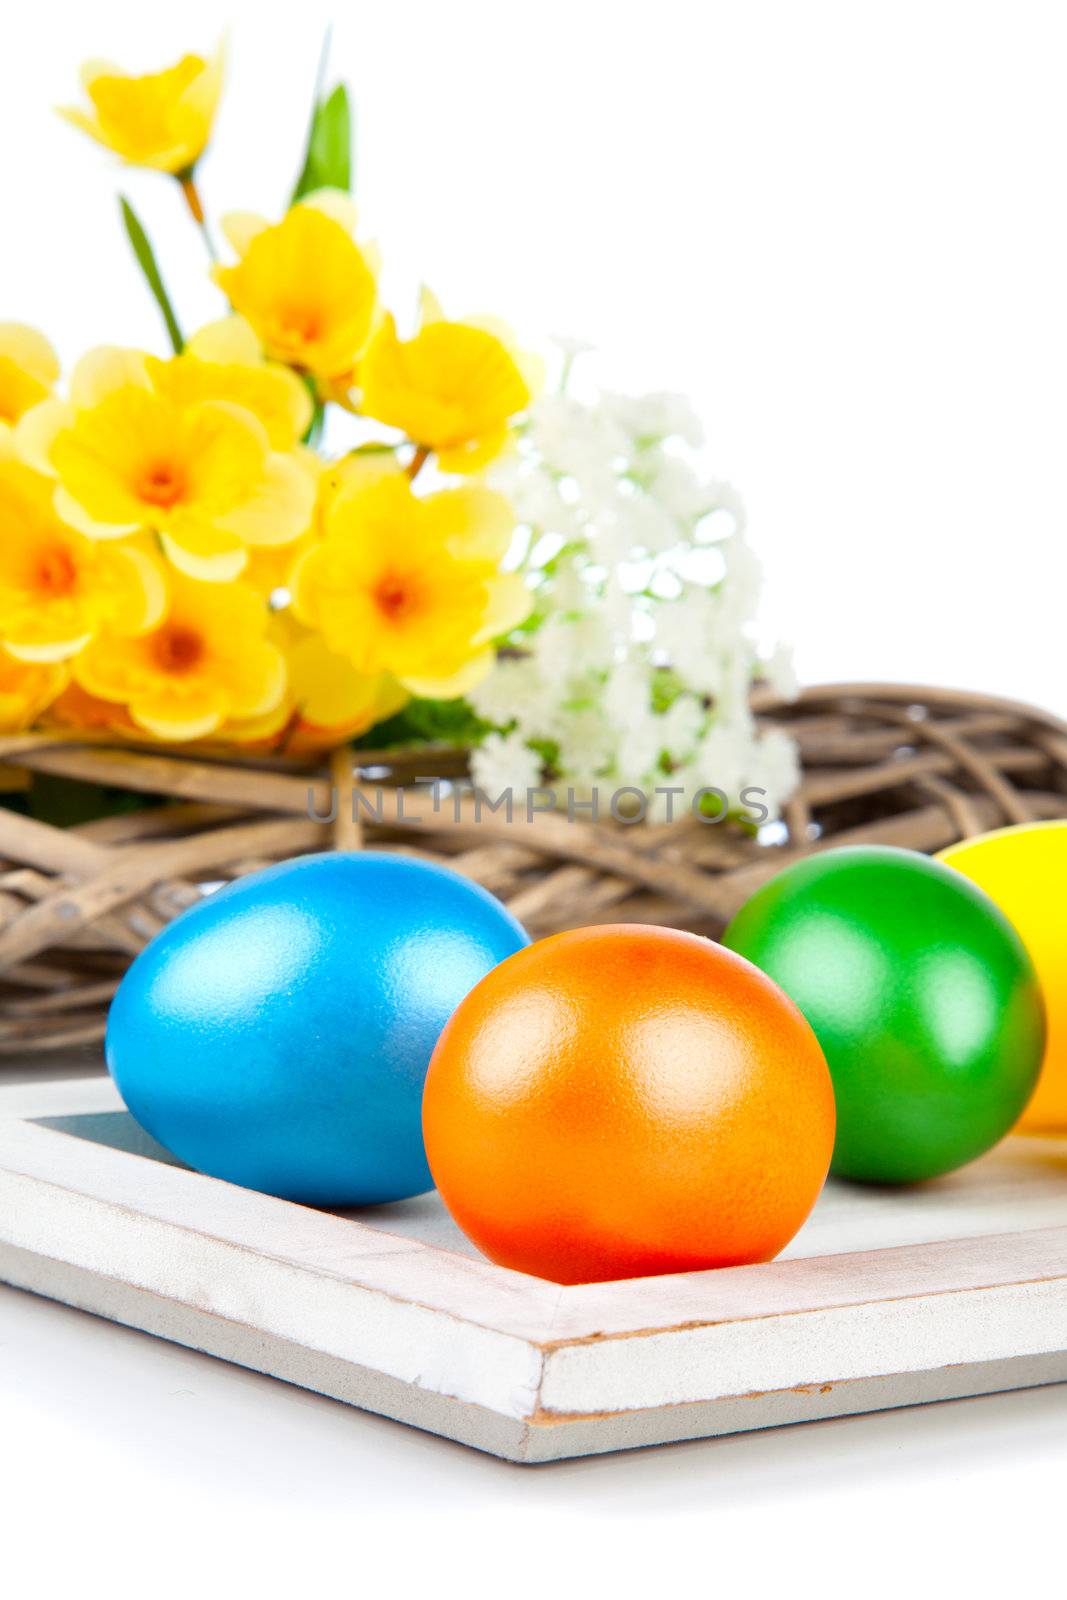 Colorful Easter Eggs on white background